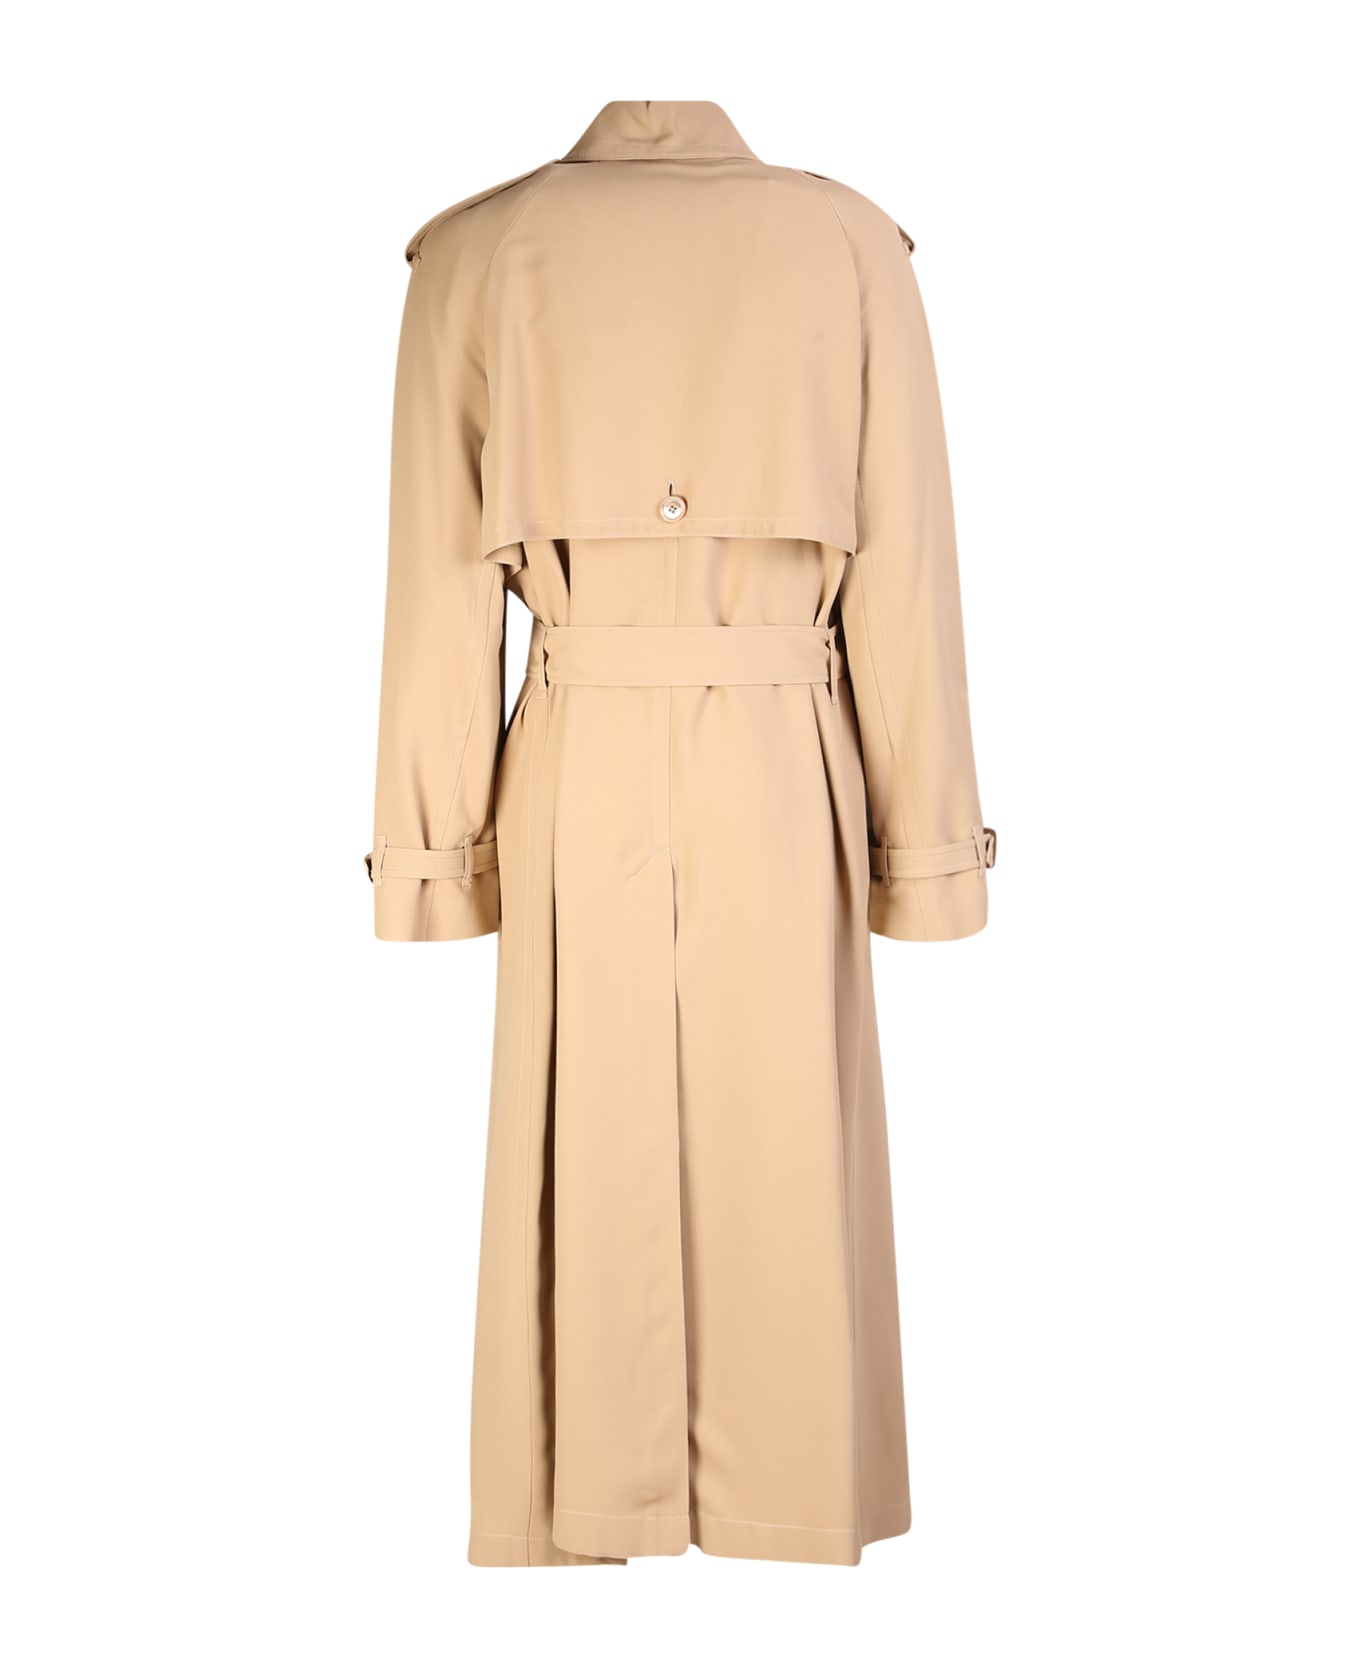 Burberry Double-breasted Trench Coat Beige - Beige レインコート